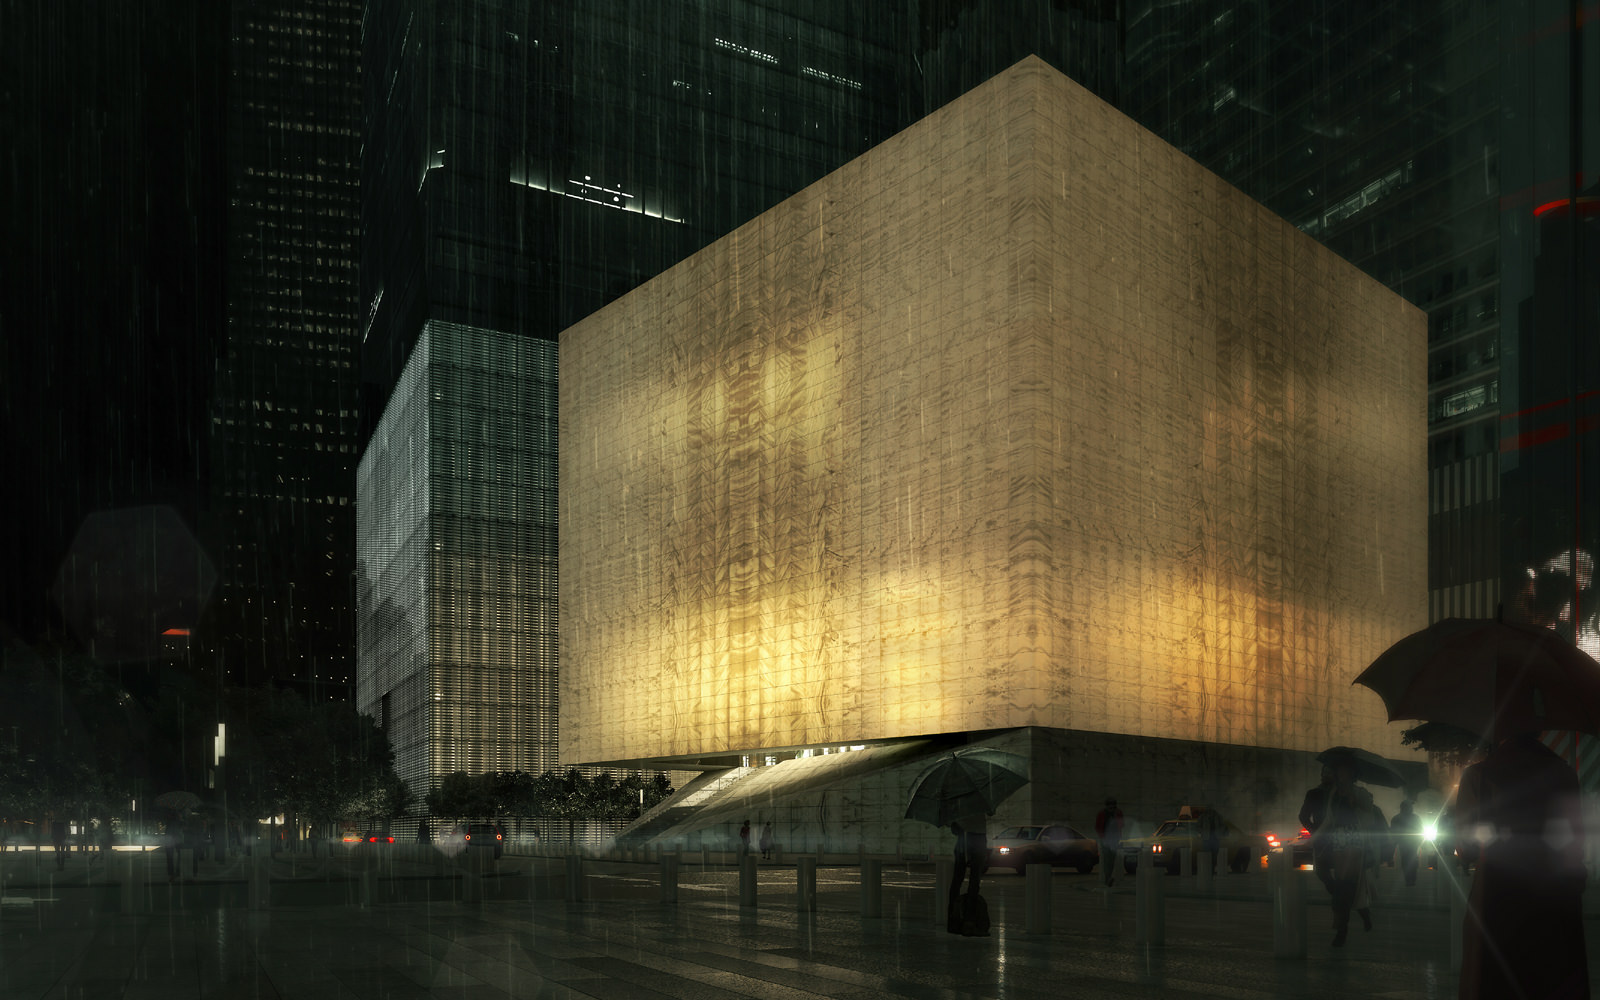 A rendering of the Perelman Center for Performing Arts, which is currently under construction at the World Trade Center.